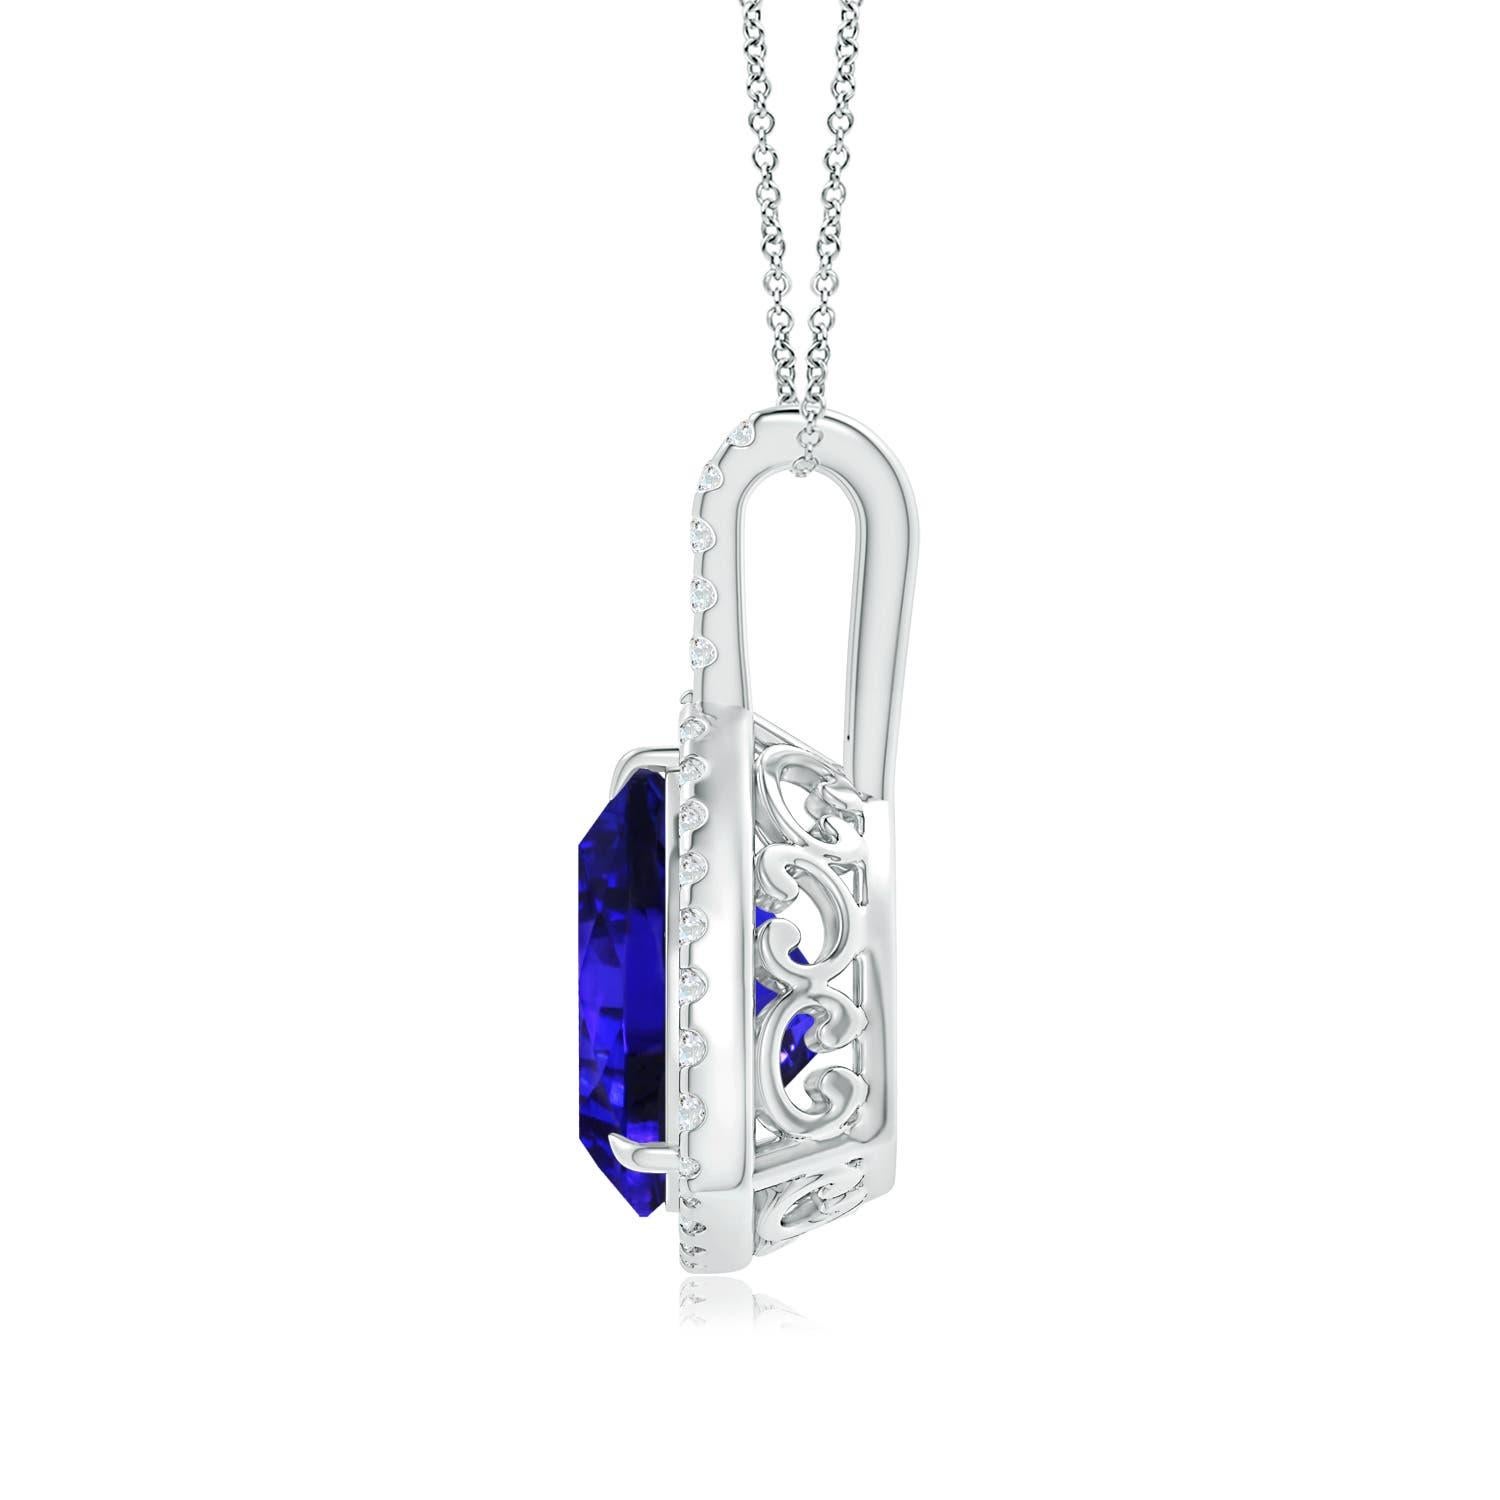 Designed with a diamond-studded bale and elegant scrollwork on the metal, this trillion tanzanite halo pendant in 18k white gold looks simple yet enigmatic. The brilliant u prong diamonds enhance the bluish-purple hue of the GIA certified